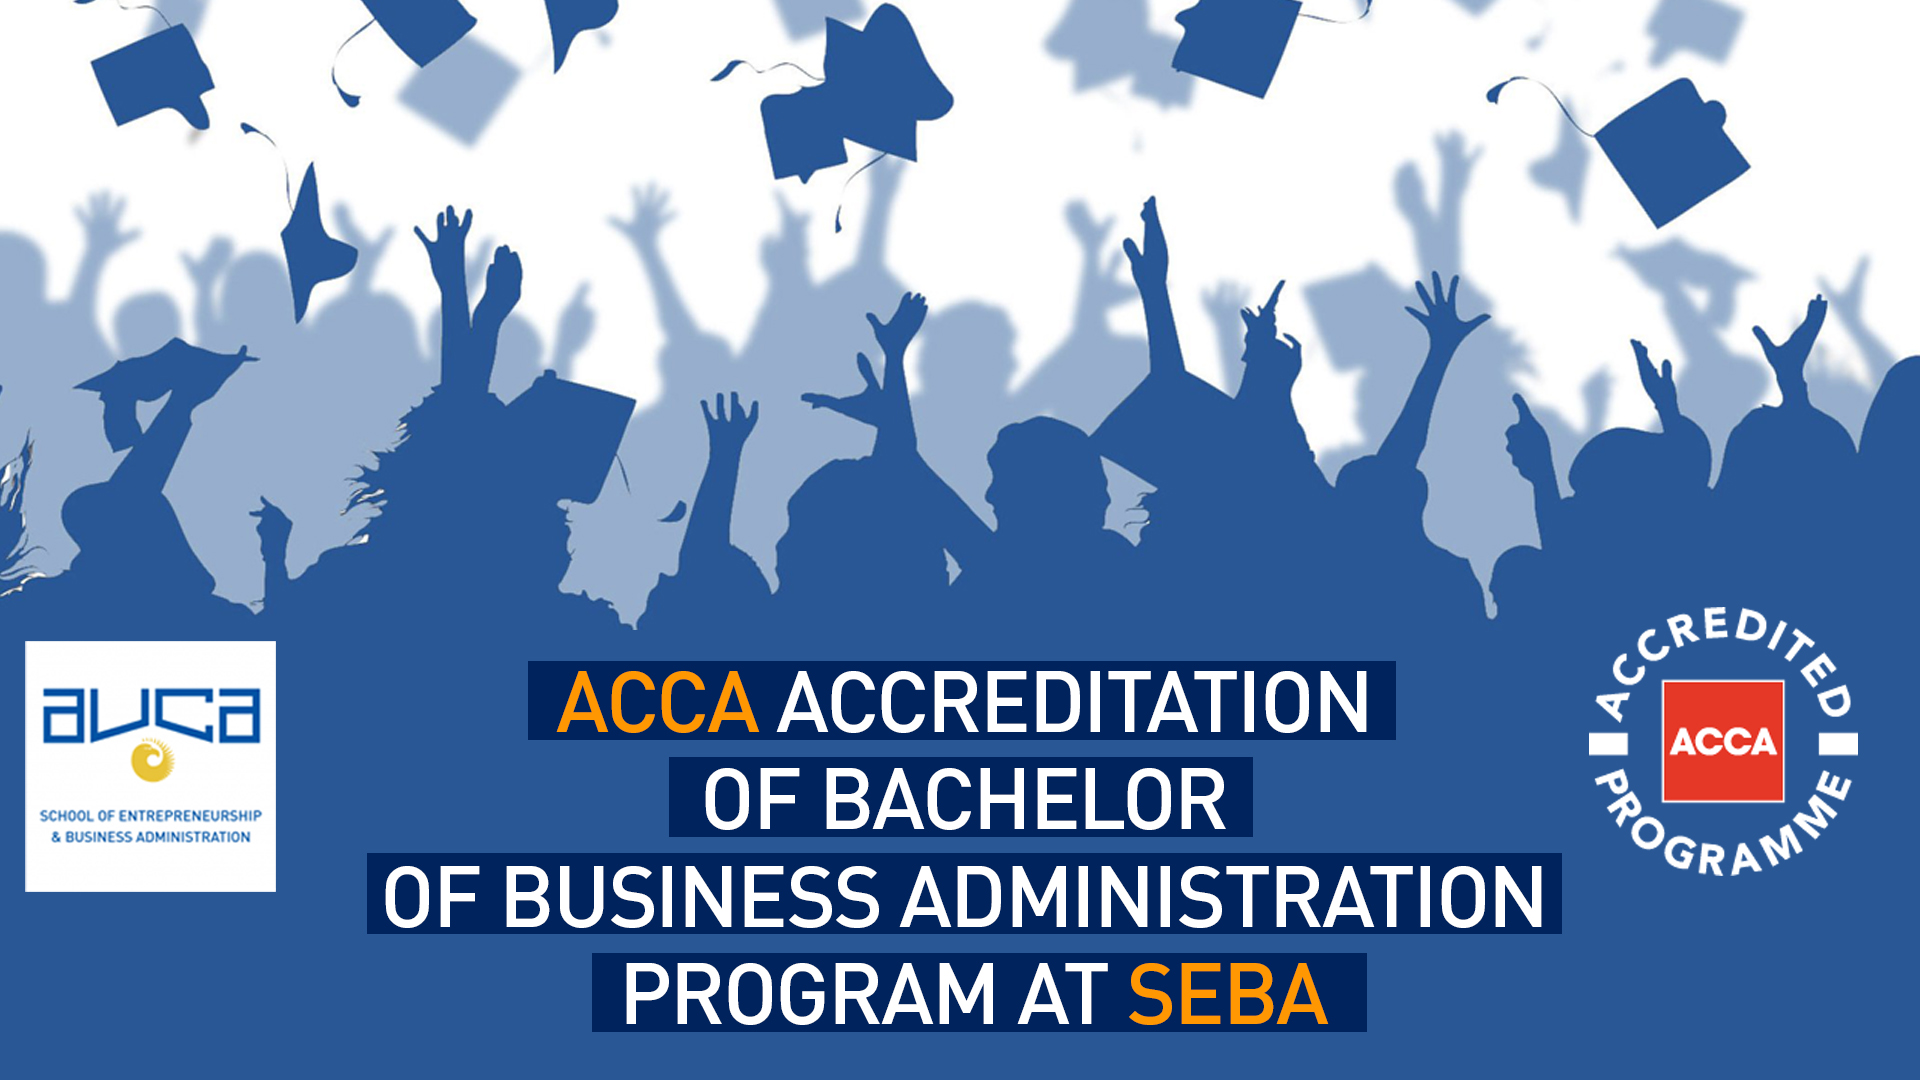 ACCA Accreditation of Bachelor of Business Administration program